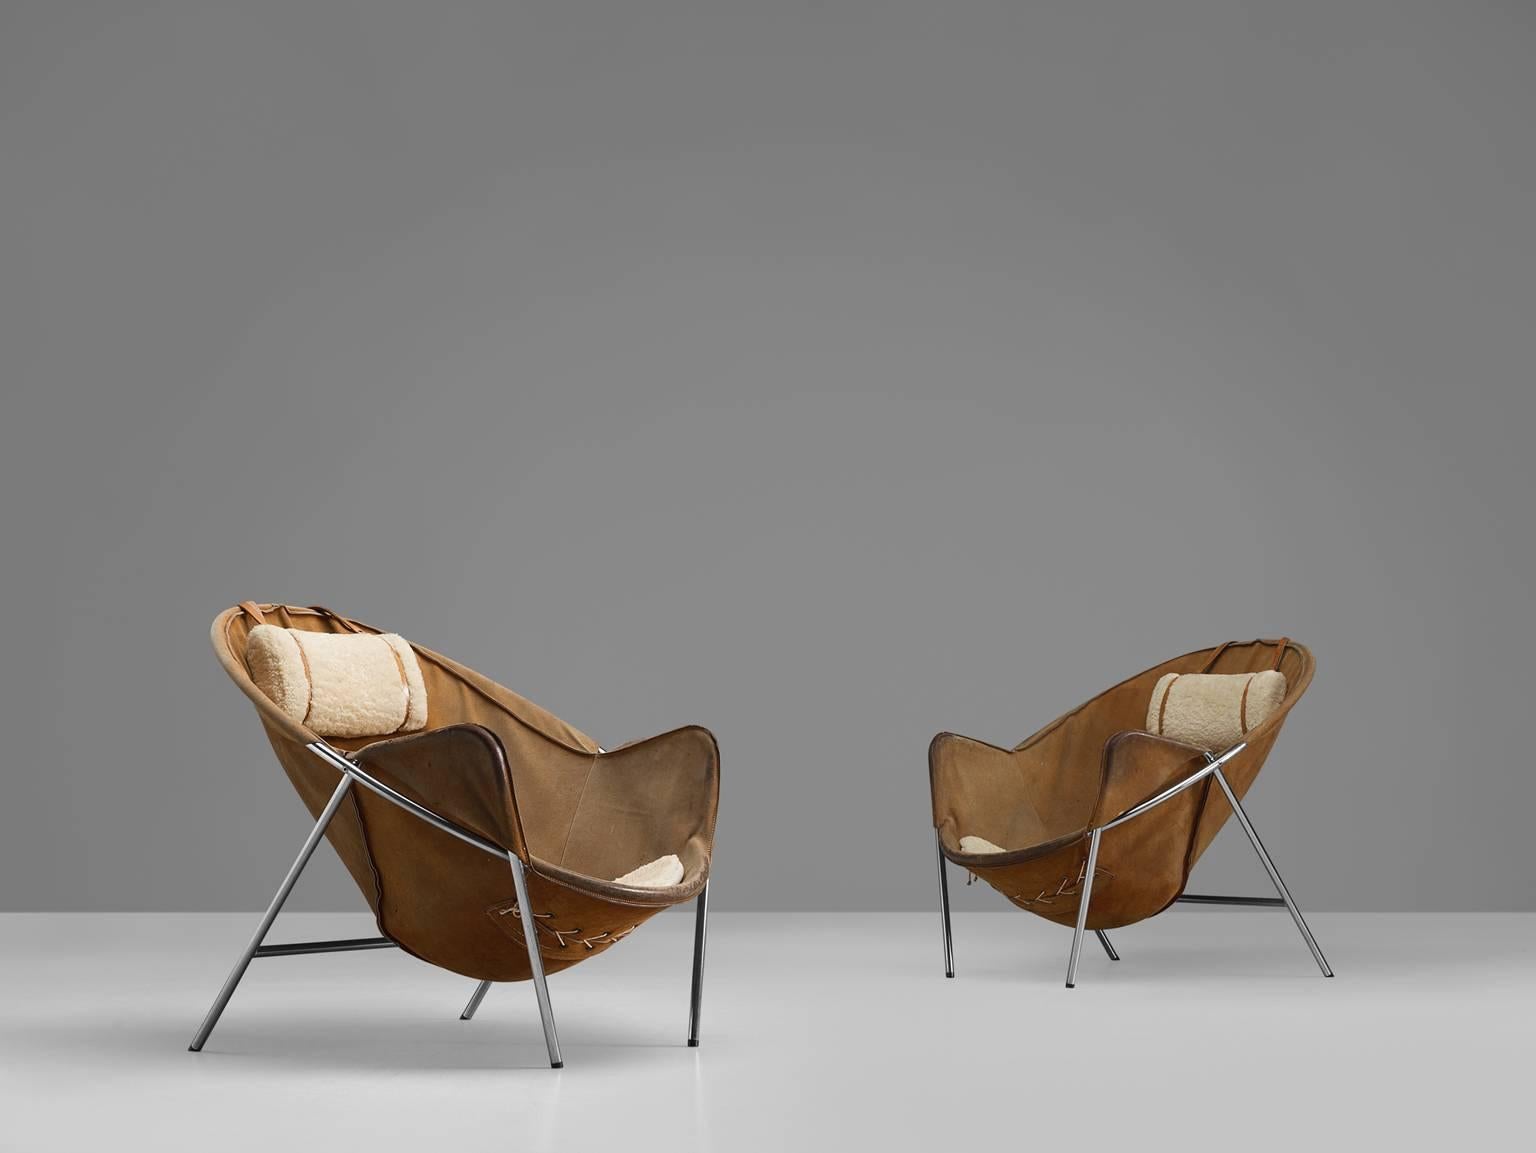 Lounge chairs, in metal, suede, fabric and wood, by Erik Ole Jorgensen for Olaf Black, Denmark, 1953. 

This set of two easy chairs is executed in beige to cognac suede. These sling chairs consist of a chromed tubular frame. To increase the comfort